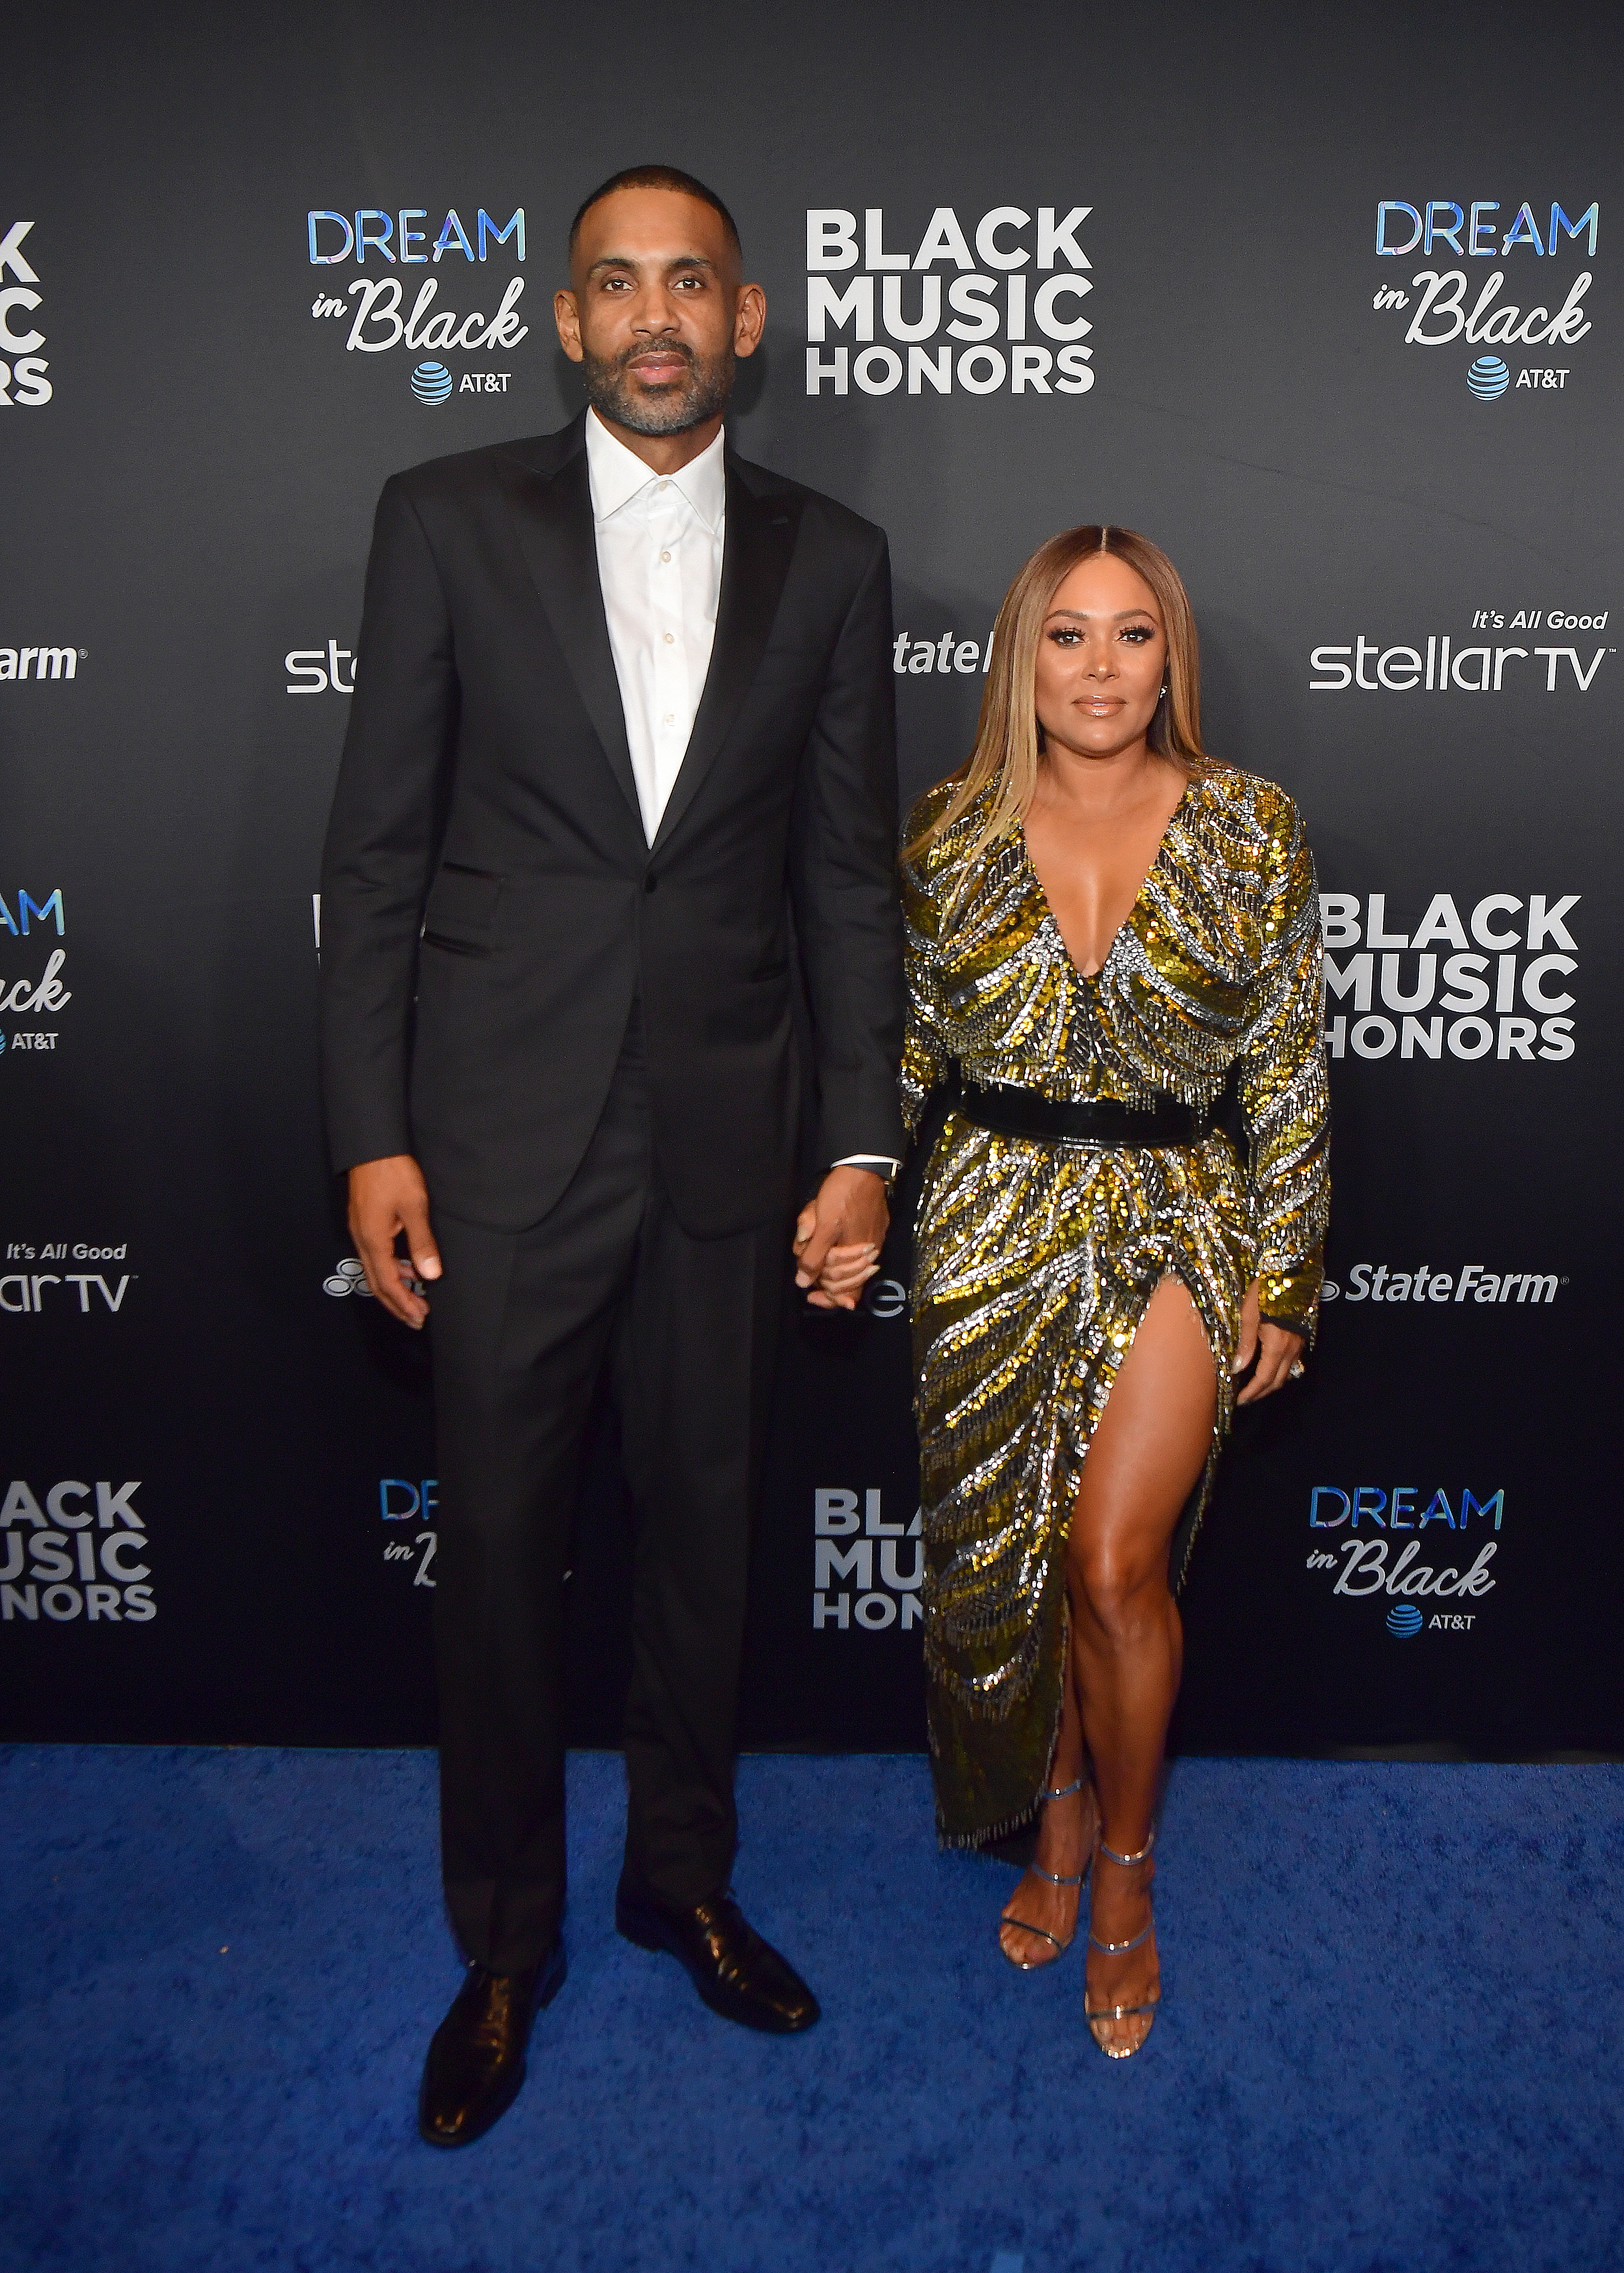 Grant and Tamia Hill at the 2019 Black Music Honors on September 5, 2019, in Atlanta, Georgia. | Source: Getty Images